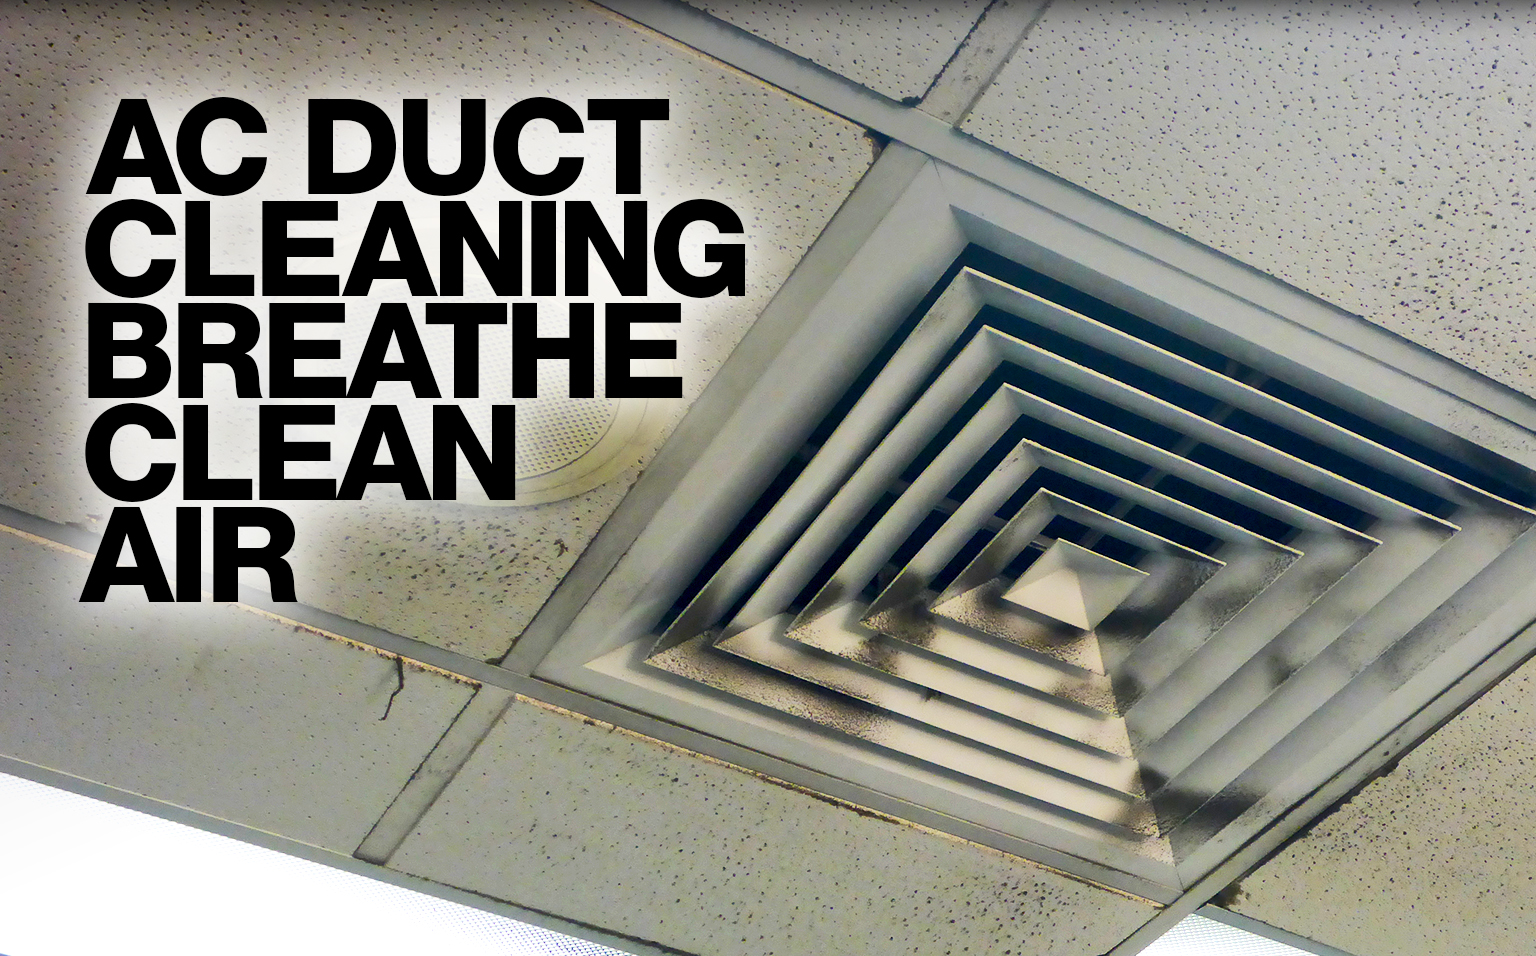 AC and Air Conditioning Duct Cleaning Services Brisbane and Gold Coast